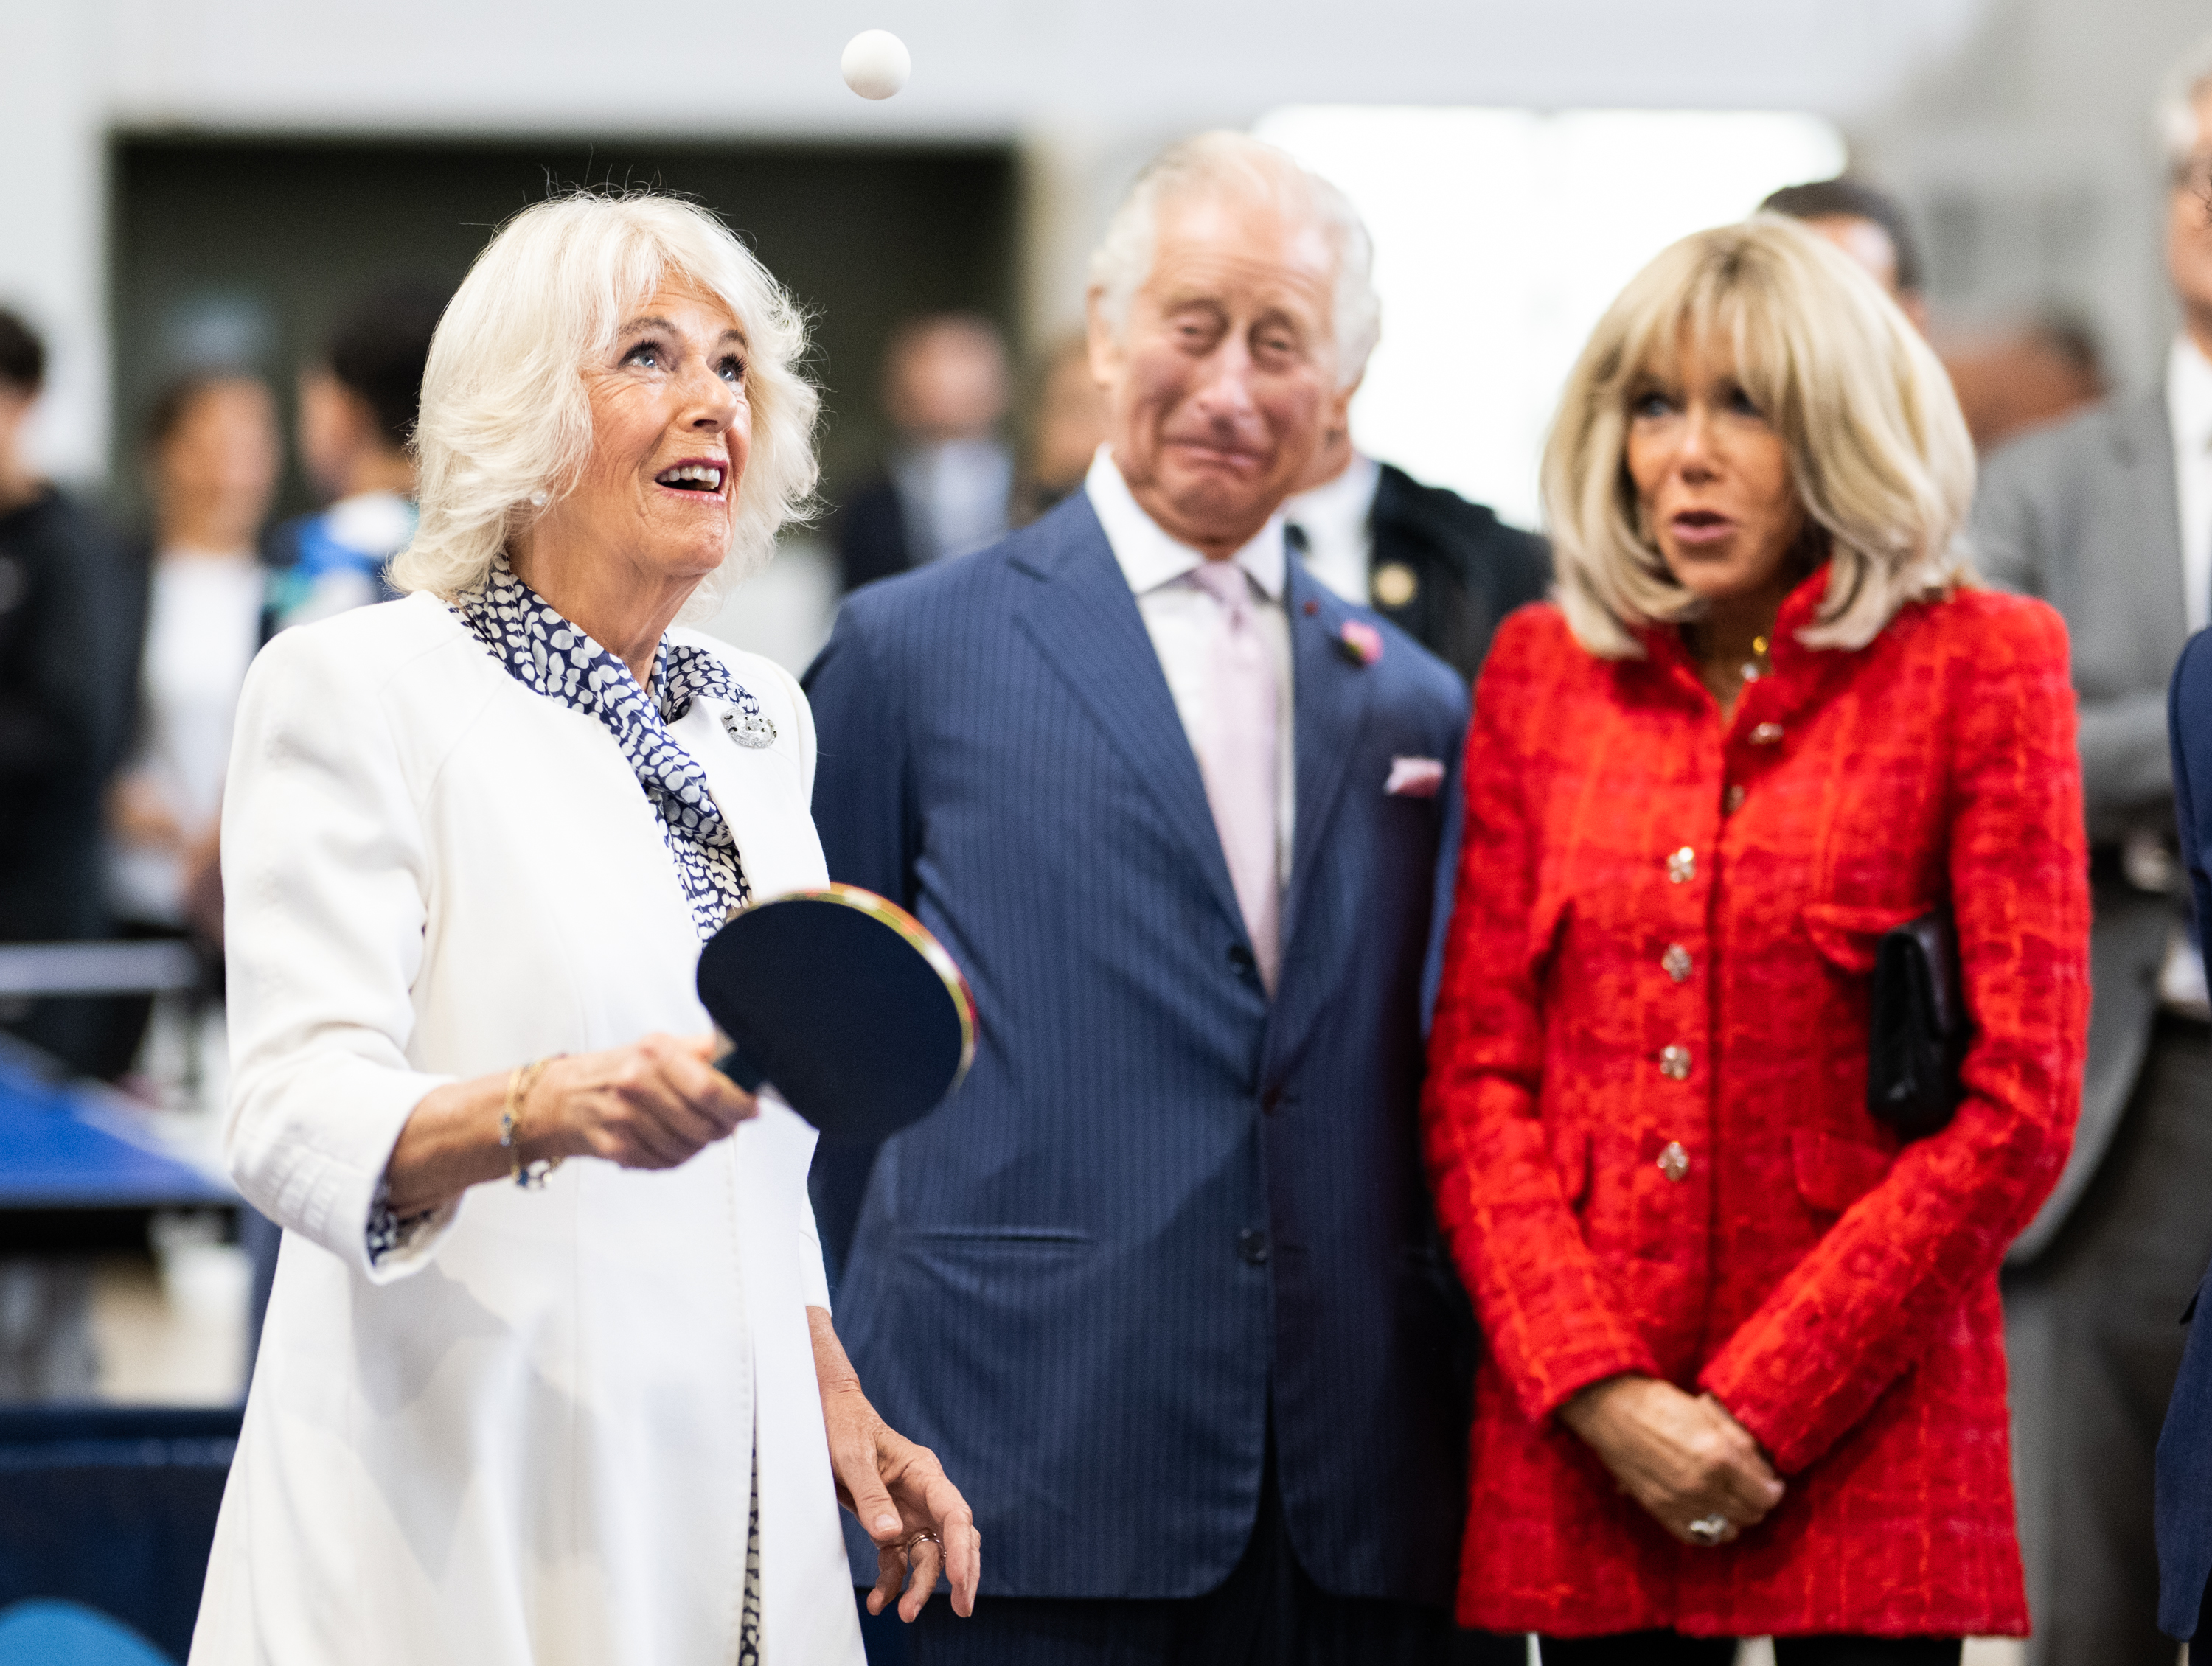 <p><span>King Charles III and France's first lady, Brigitte Macron, looked unimpressed as Queen Camilla played table tennis during a visit to youth sports associations in Saint-Denis near Paris on Sept. 21, 2023, on day two of the British </span><a href="https://www.wonderwall.com/entertainment/king-charles-iii-and-queen-camilla-in-france-see-the-best-photos-from-the-royals-official-state-visit-791038.gallery">royals' state visit to France</a><span>.</span></p>